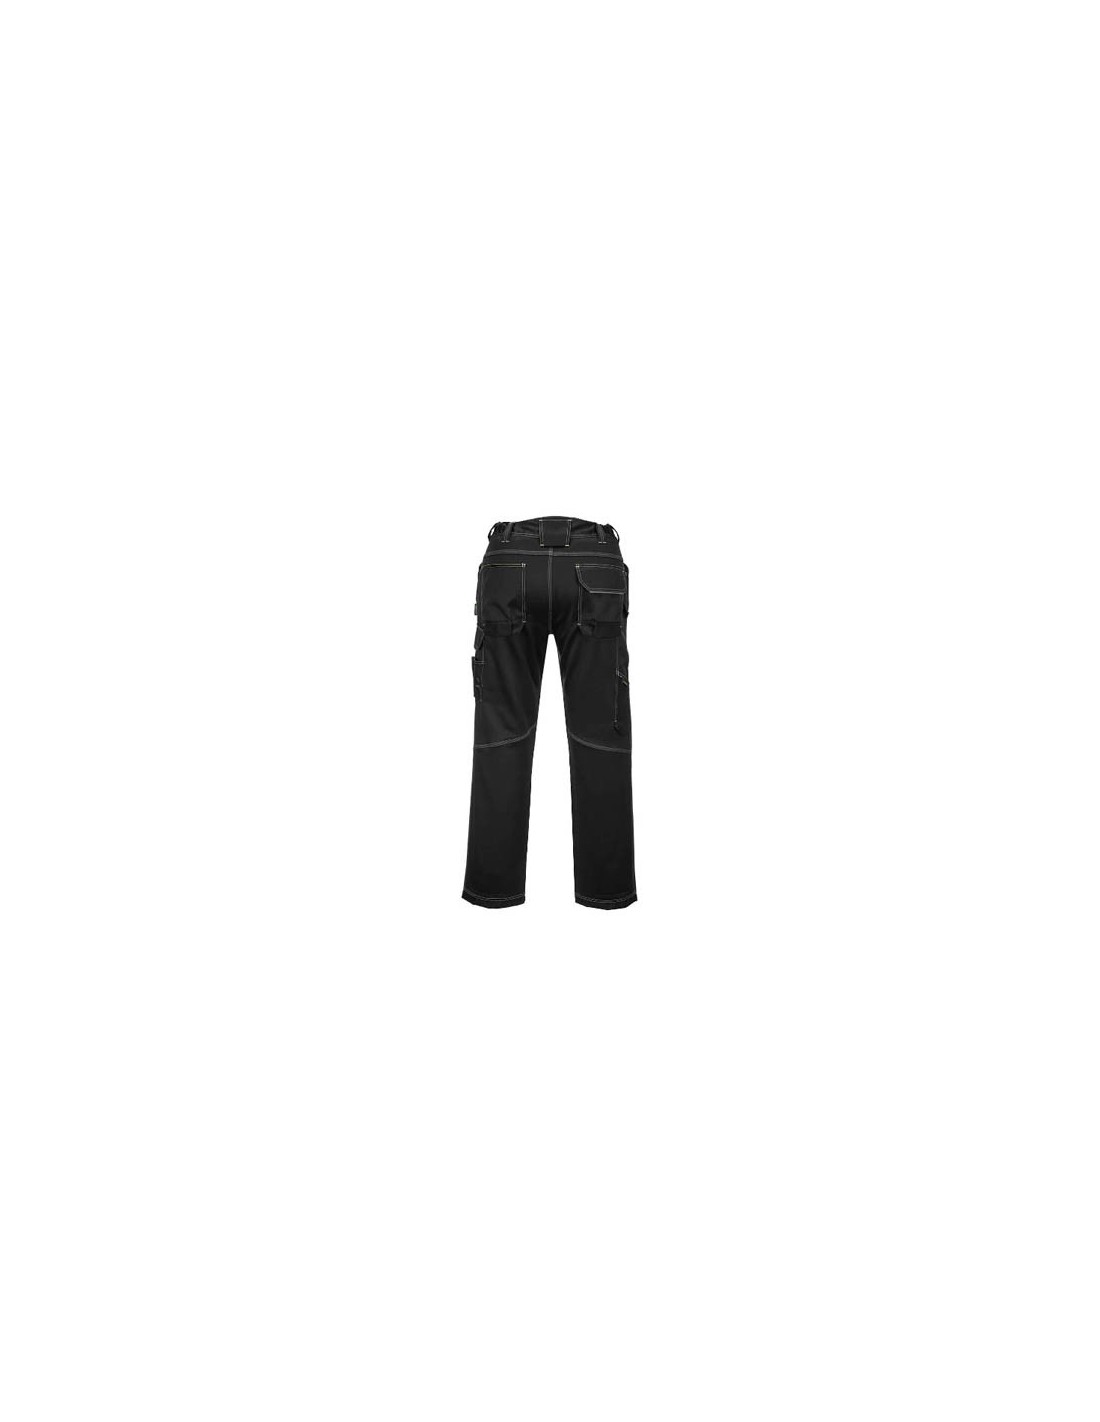 Portwest CD887 WX2 Women's Stretch Work Trousers - Size: 26 to 38